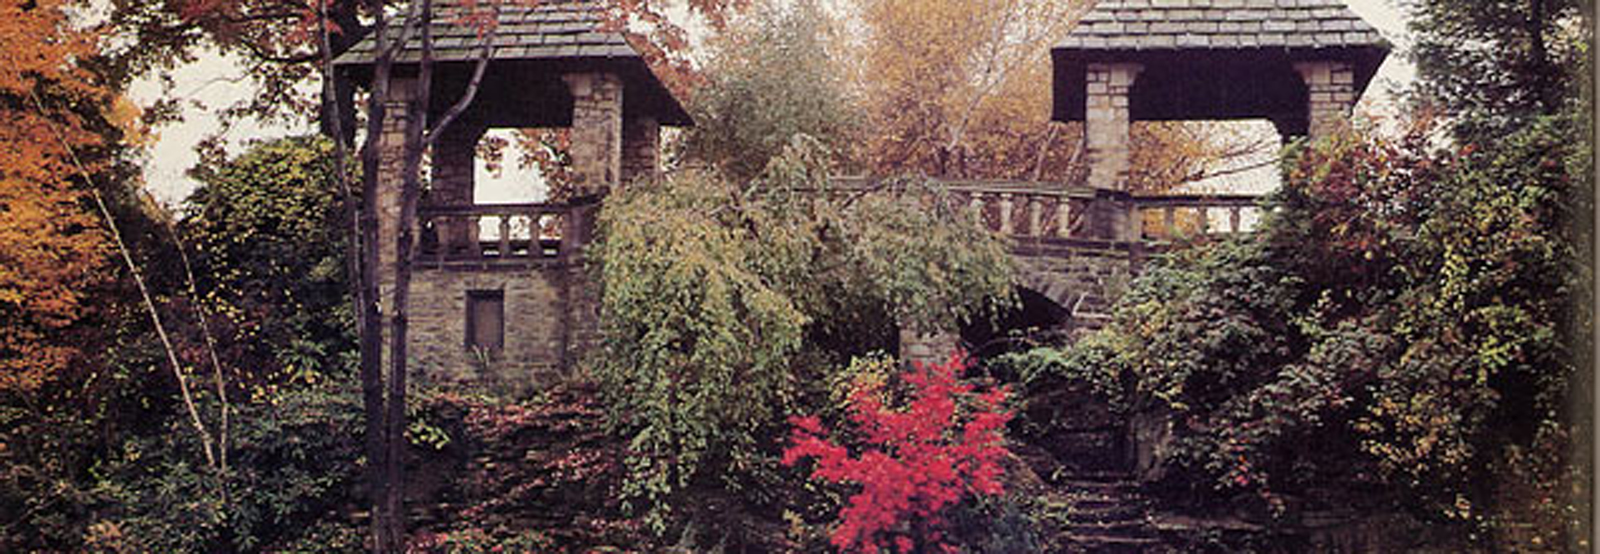 A Midwestern Original Stan Hywet Hall And Gardens The Cultural